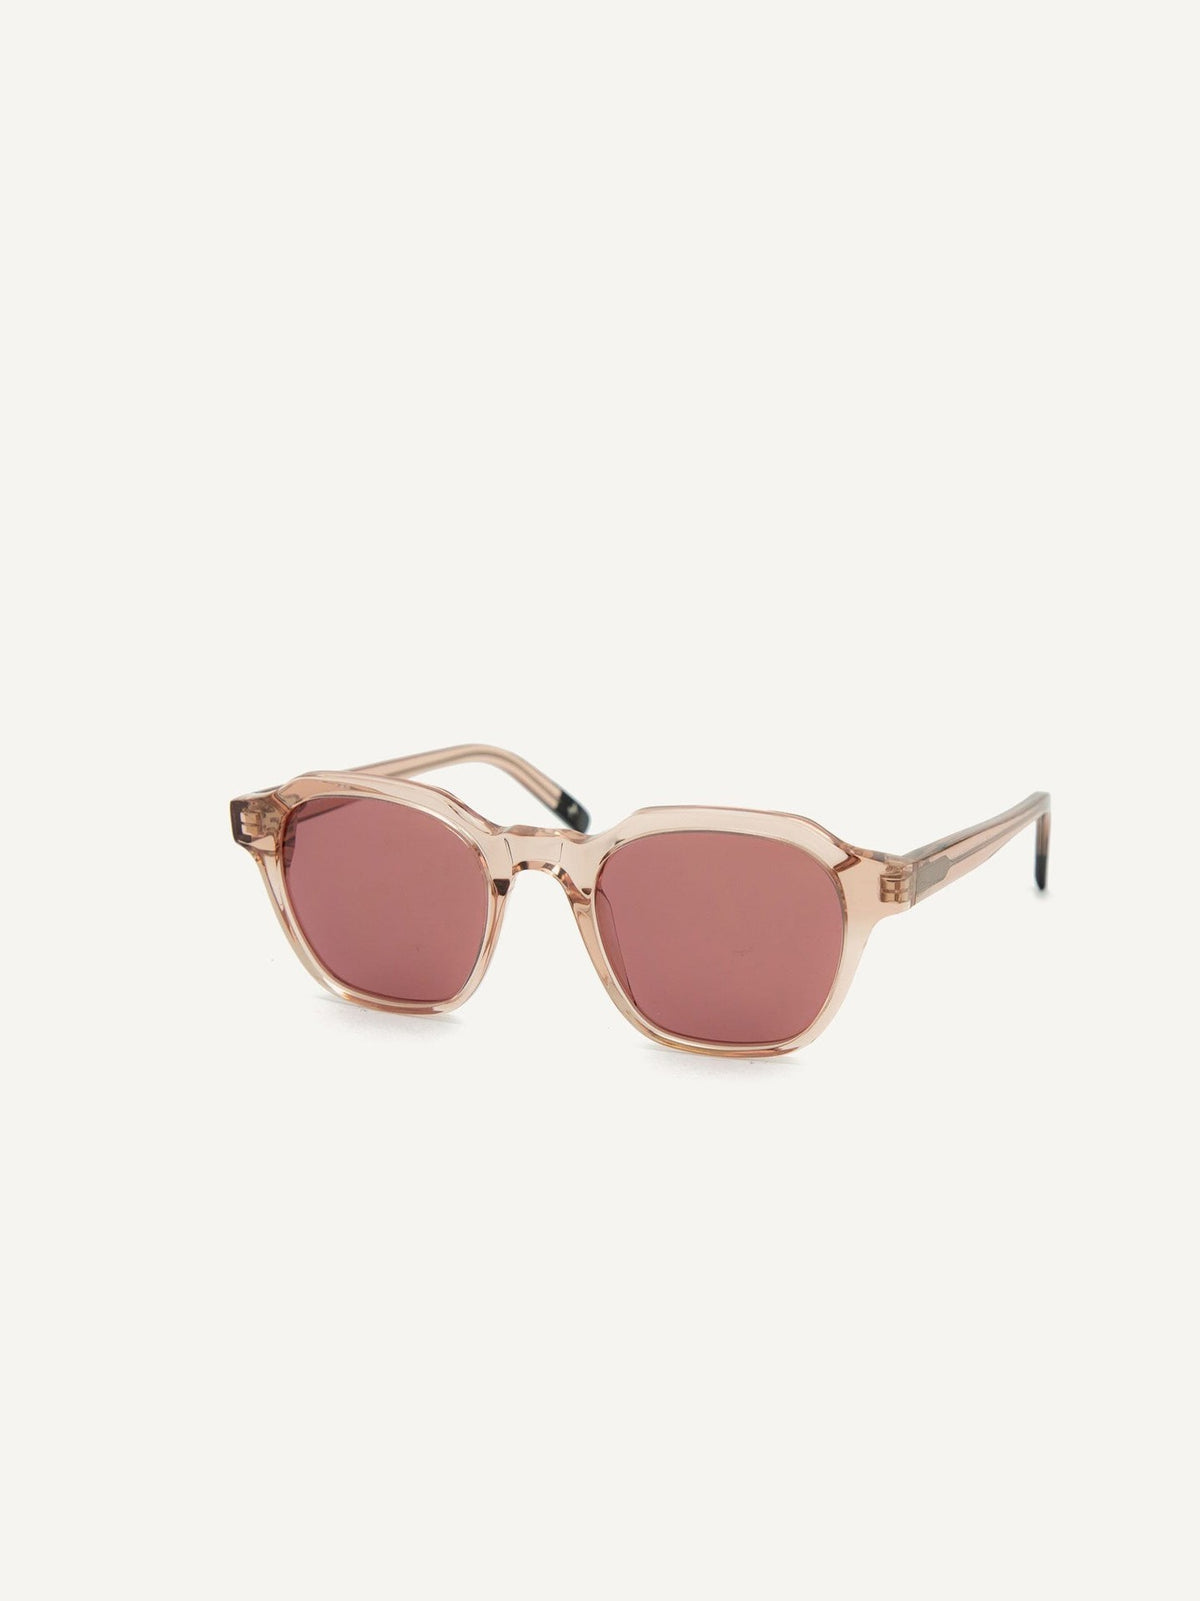 A pair of Barcelona Sunglasses - Pale Rose by Dick Moby on a white background.